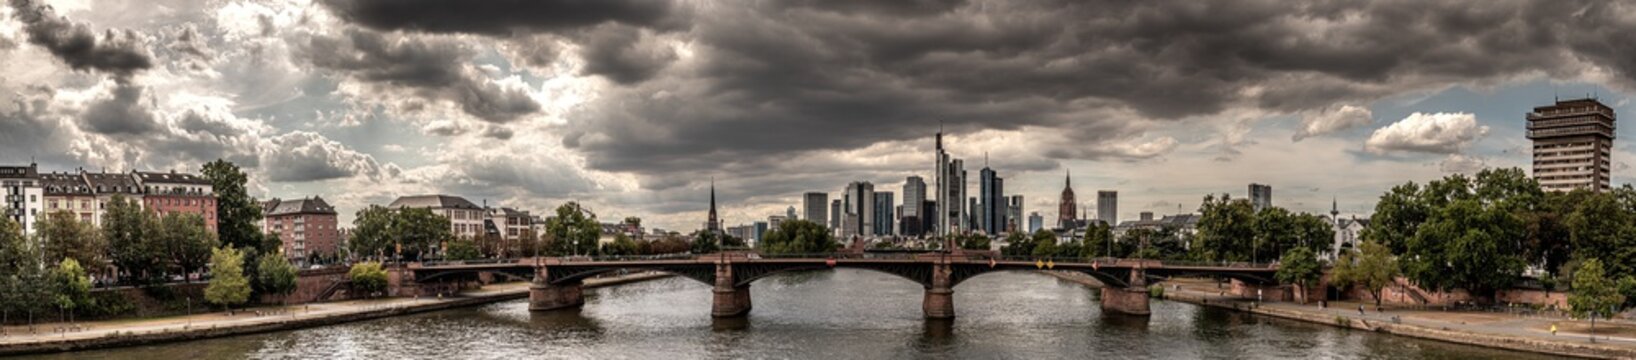 high resolution panorama photo of the Frankfurt,am Main Germany skyline on a stormy day with dark storm clouds